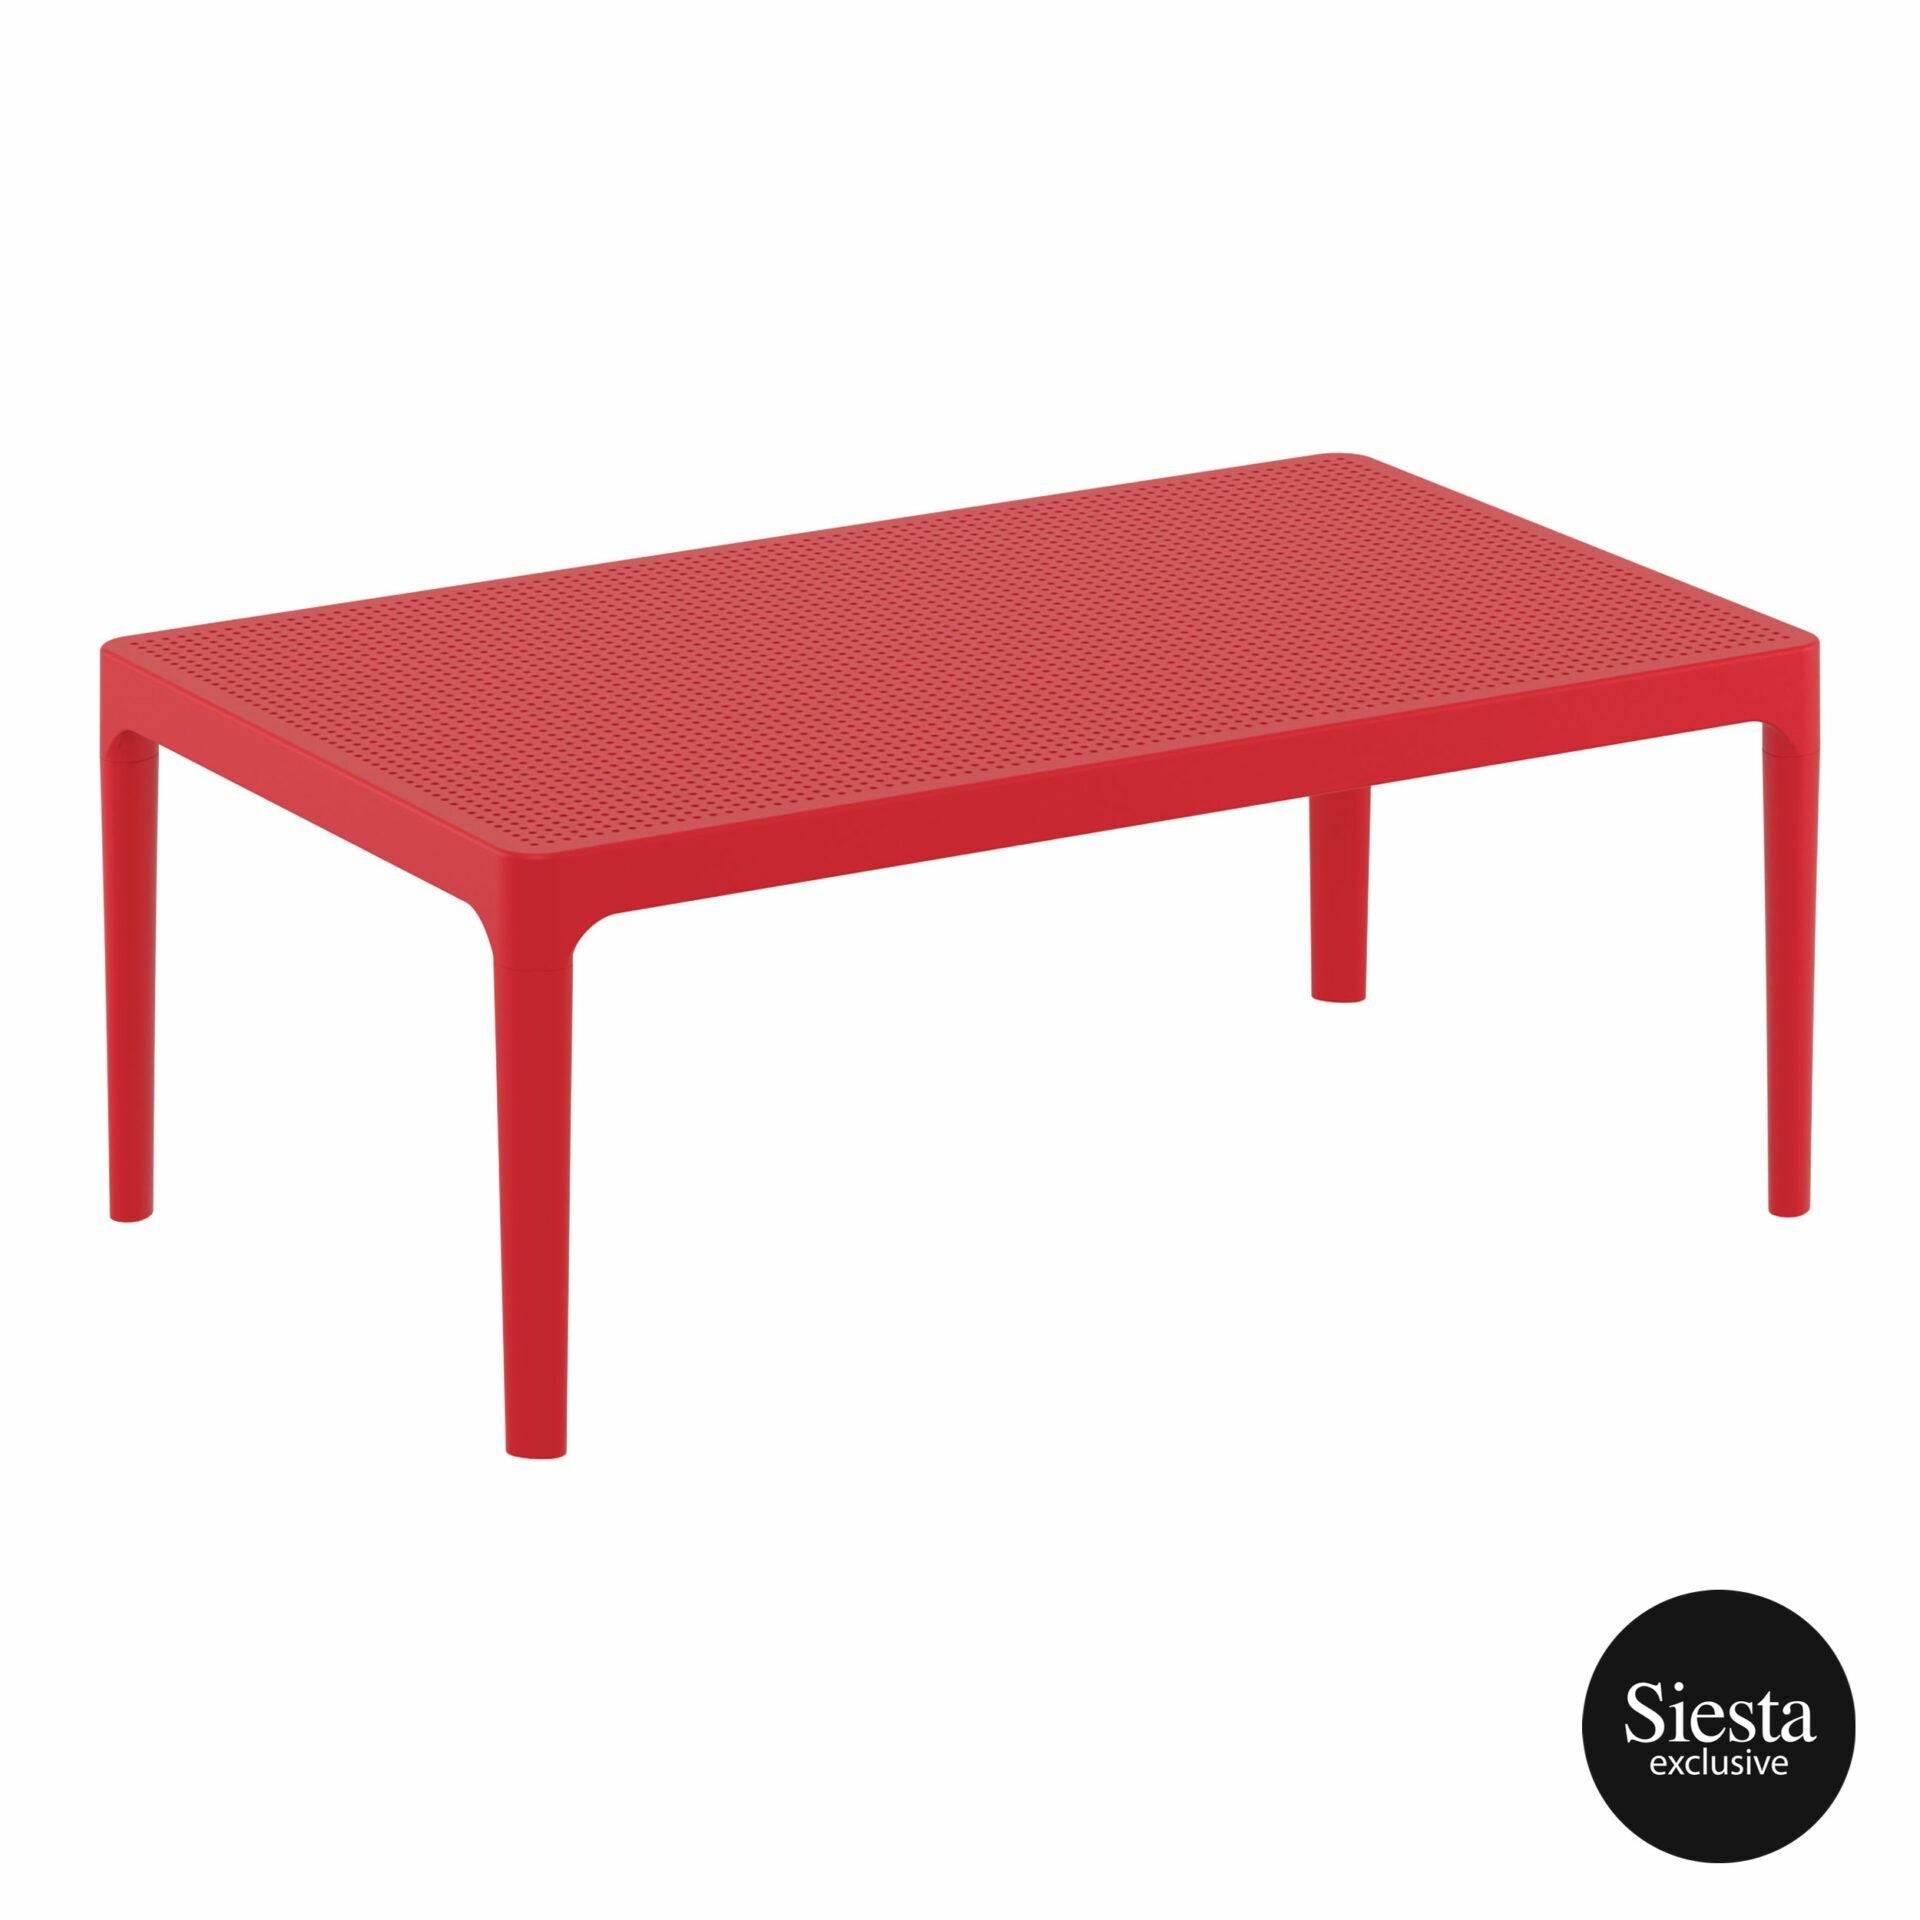 Sky Lounge Coffee Table 1000×600 - Red